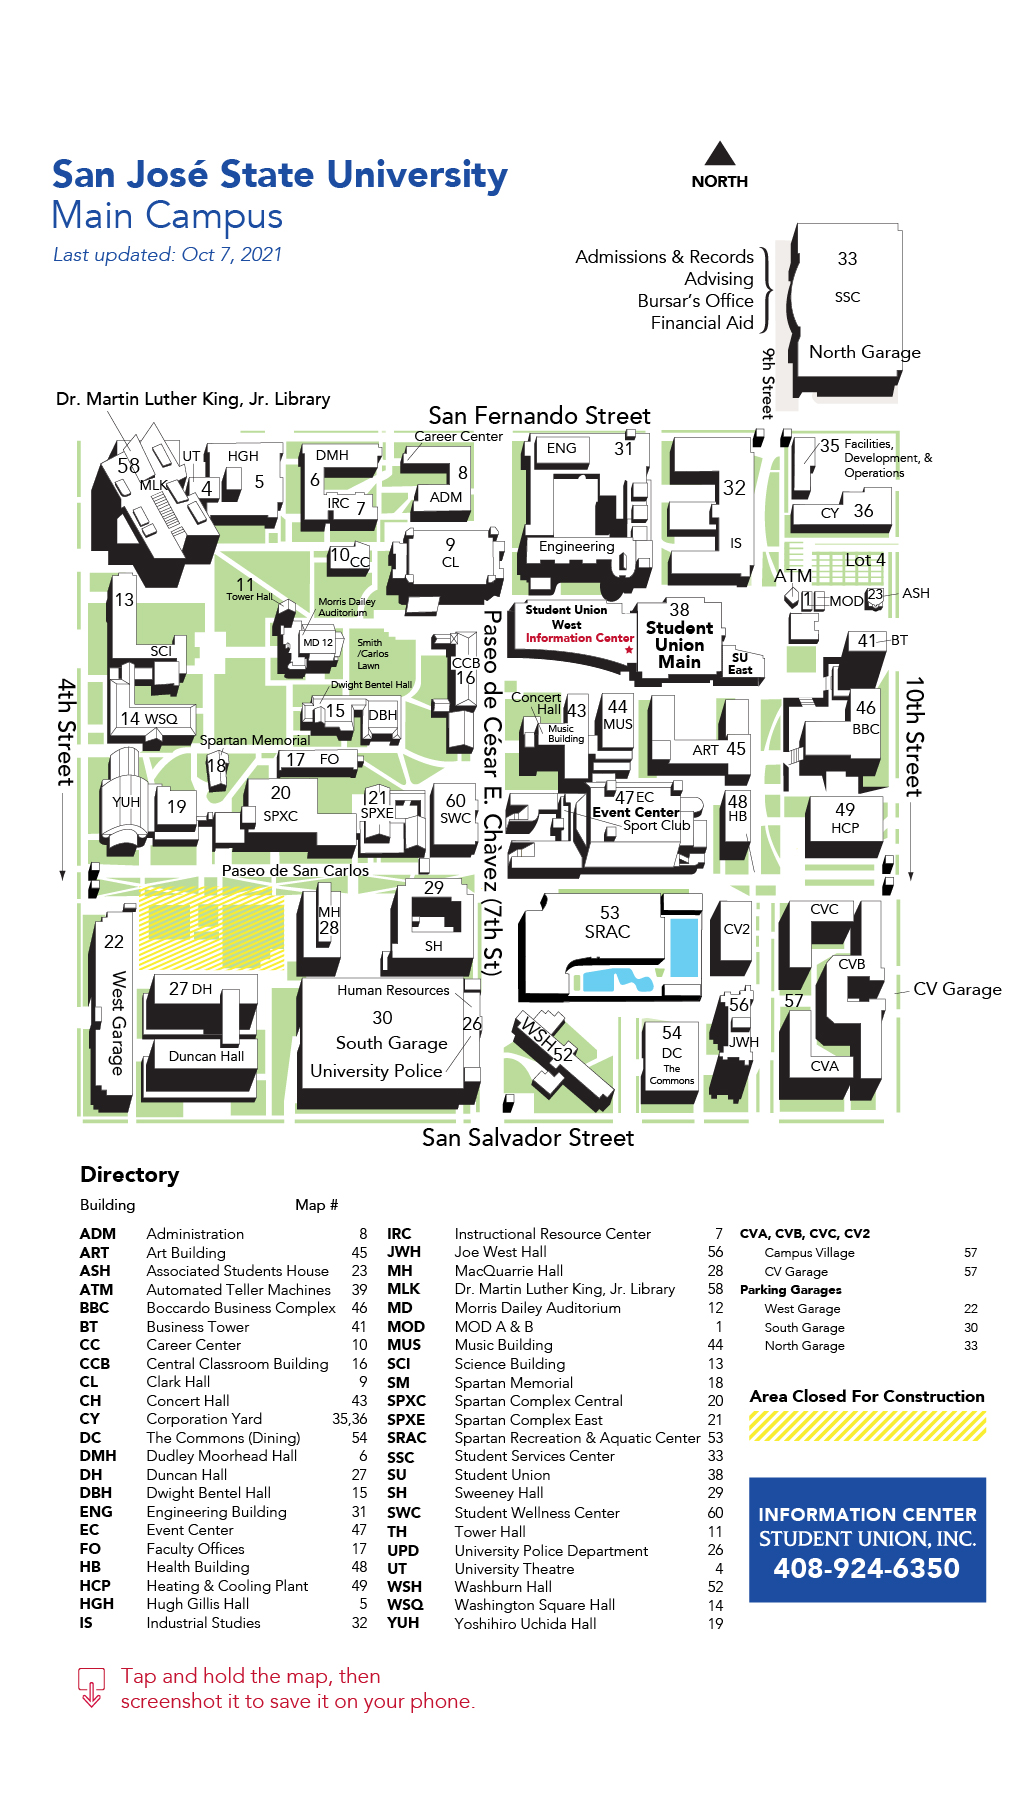 A map of the campus.